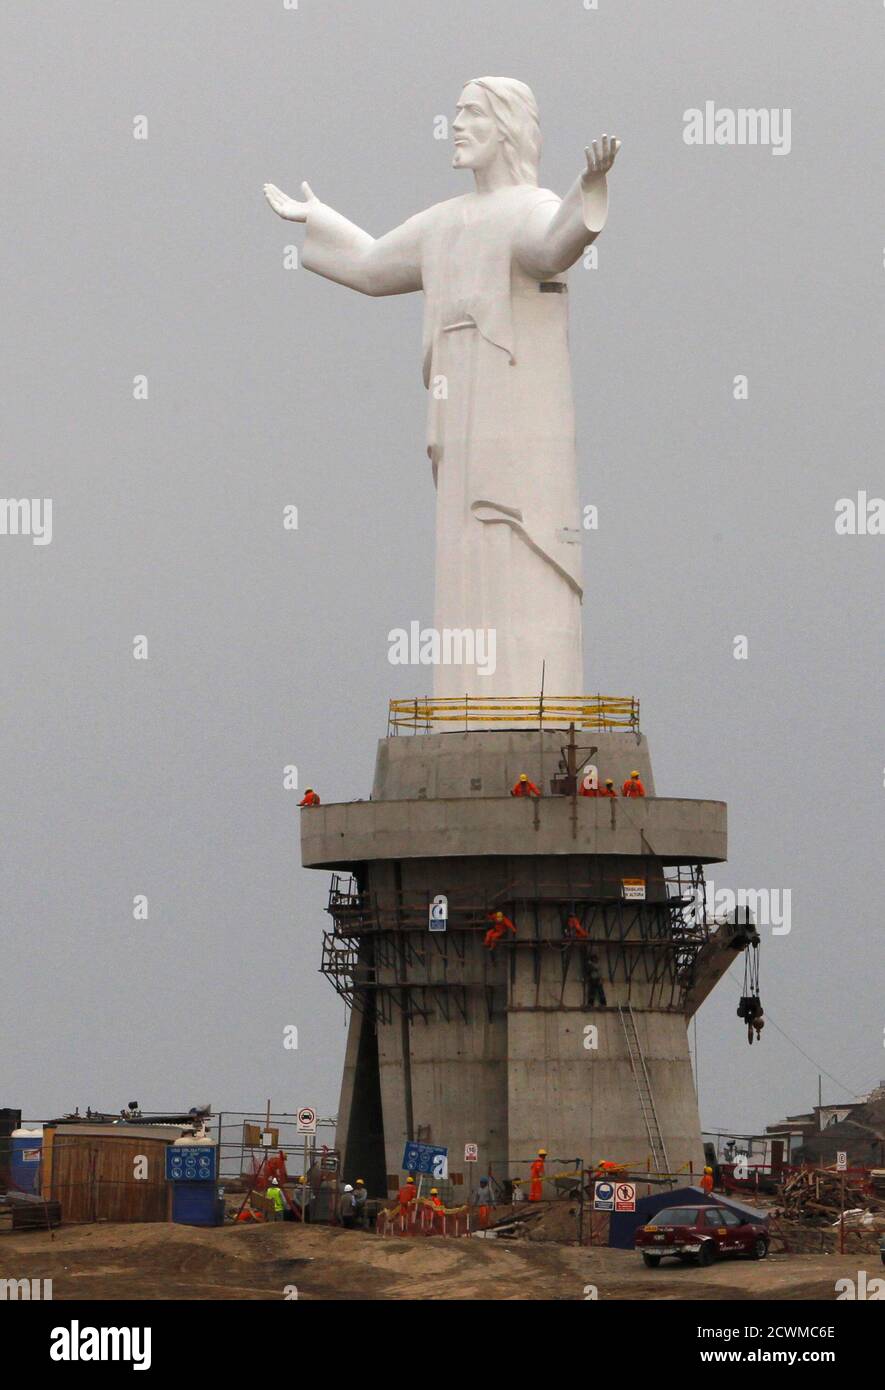 People work on the construction of a statue named "Christ of the Pacific"  which overlooks Lima from the top of Morro Solar hill in Lima's district of  Chorrillos June 16, 2011. The